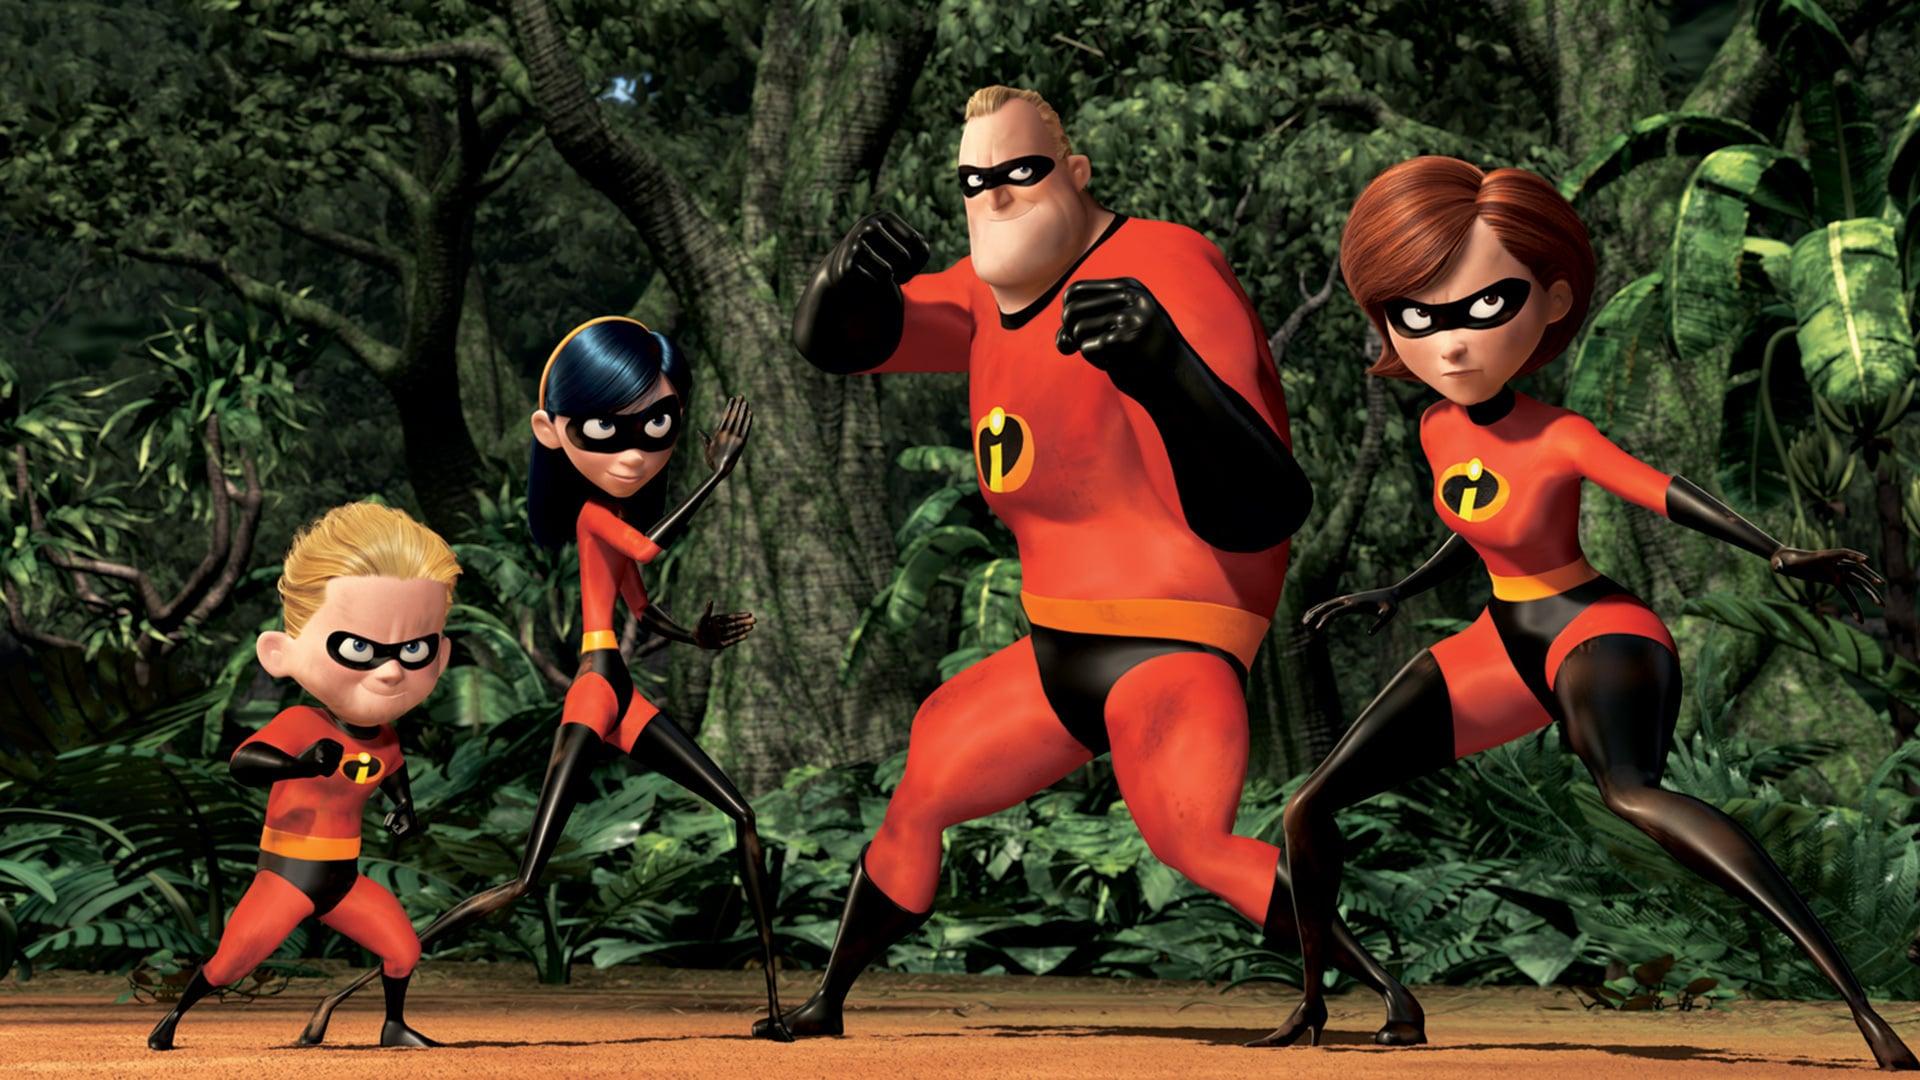 Backdrop Image for The Incredibles